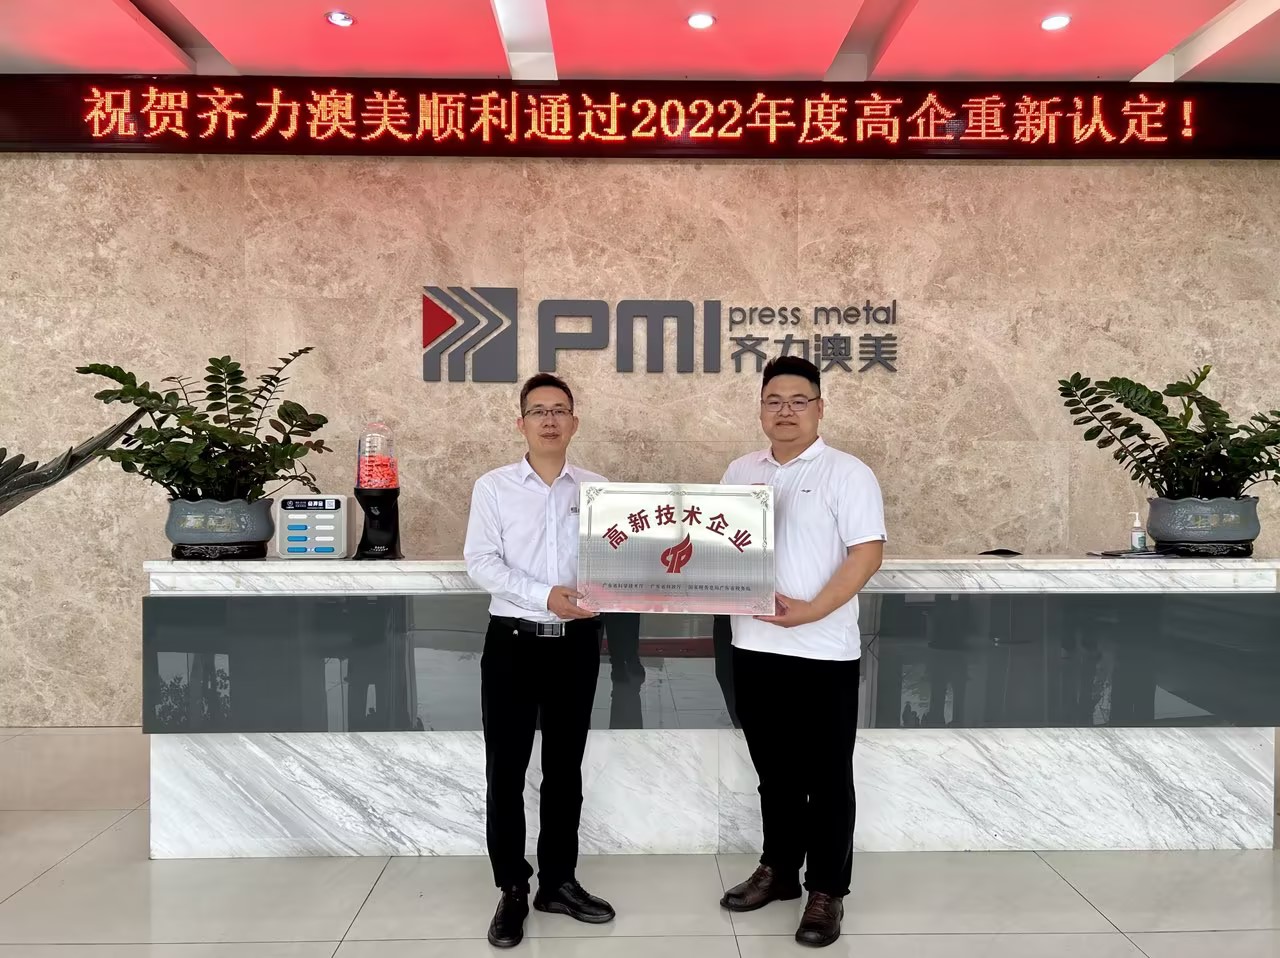 PMI Passed the High-tech Enterprise Re-certification